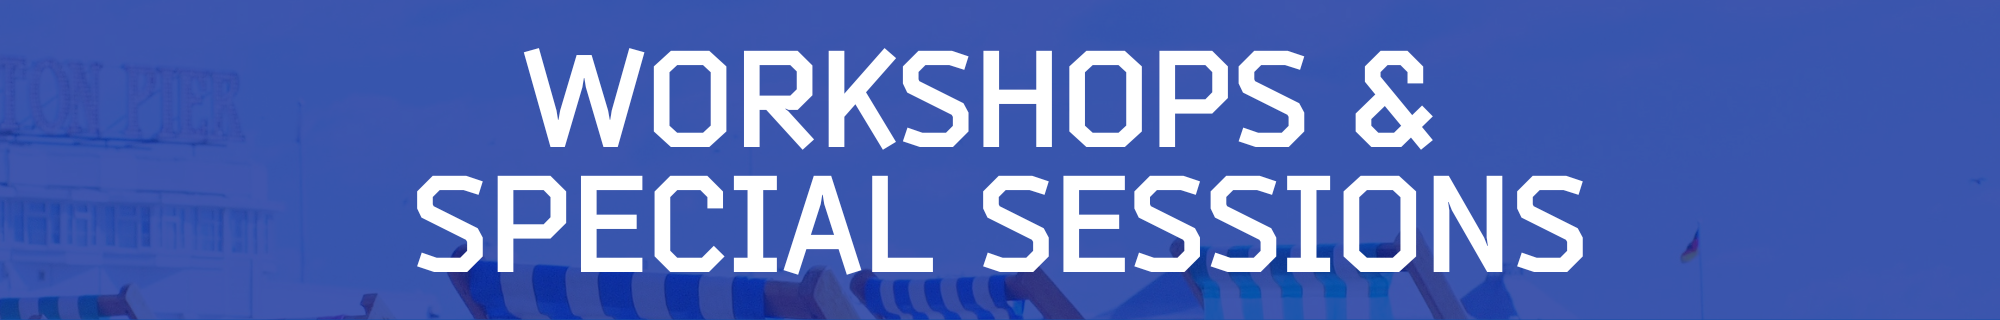 workshops and special sessions